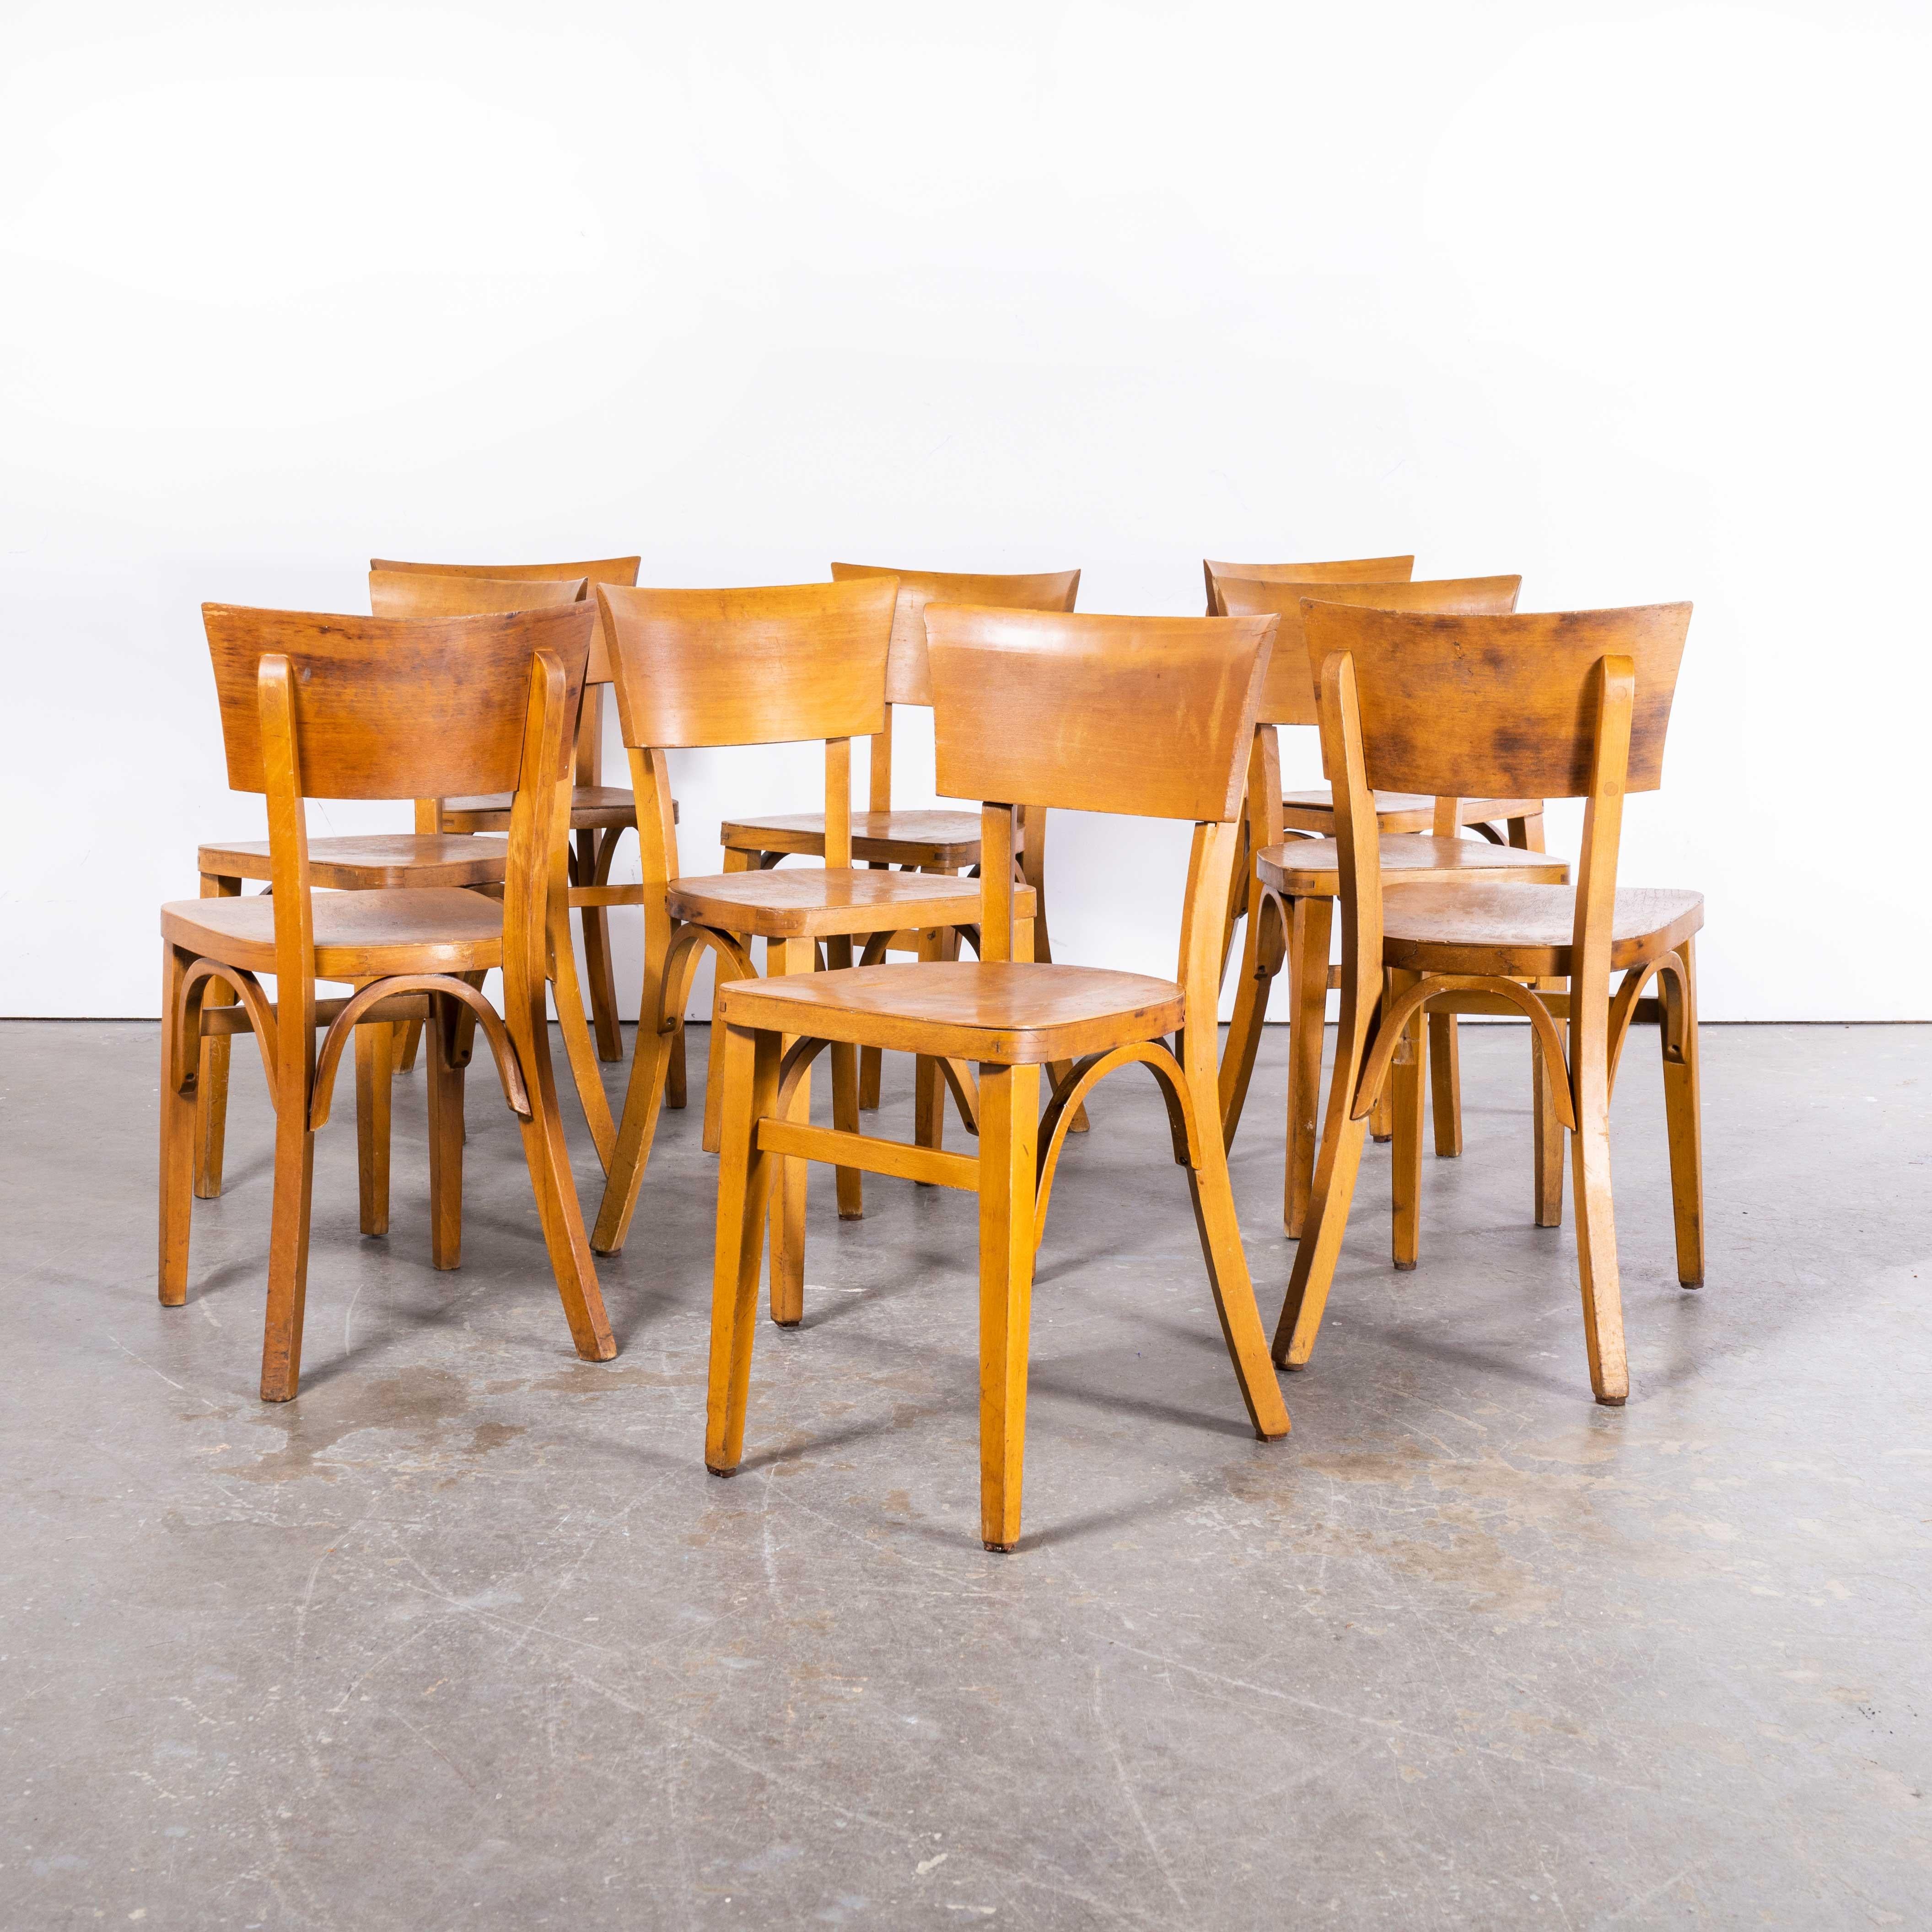 1960? S Baumann Deep Back Bistro Dining Chairs – Set Of Nine
1960? S Baumann Deep Back Bistro Dining Chairs – Set Of Nine. Classic bistro chairs made in France by the maker Baumann. Baumann chairs are relatively off the radar and are starting to